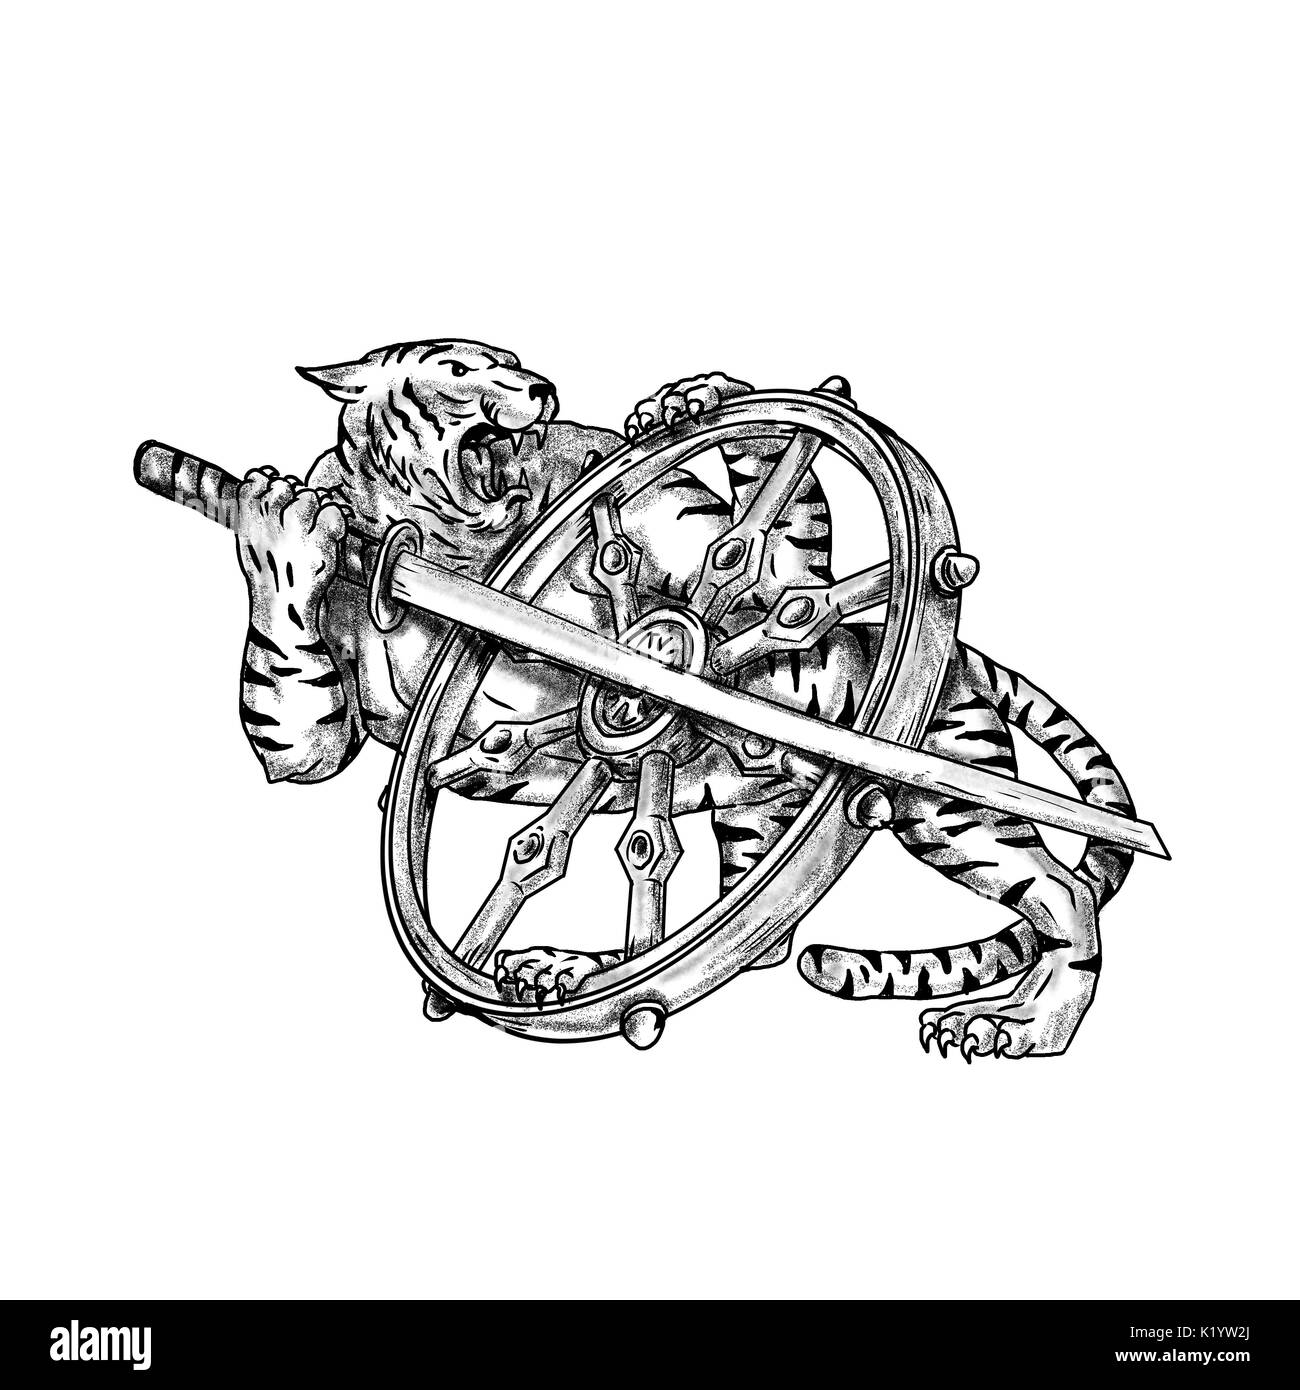 Tattoo style illustration of a Tiger With Katana Samurai Sword and Dharma Wheel done in hand sketch drawing Tattoo style. Stock Photo